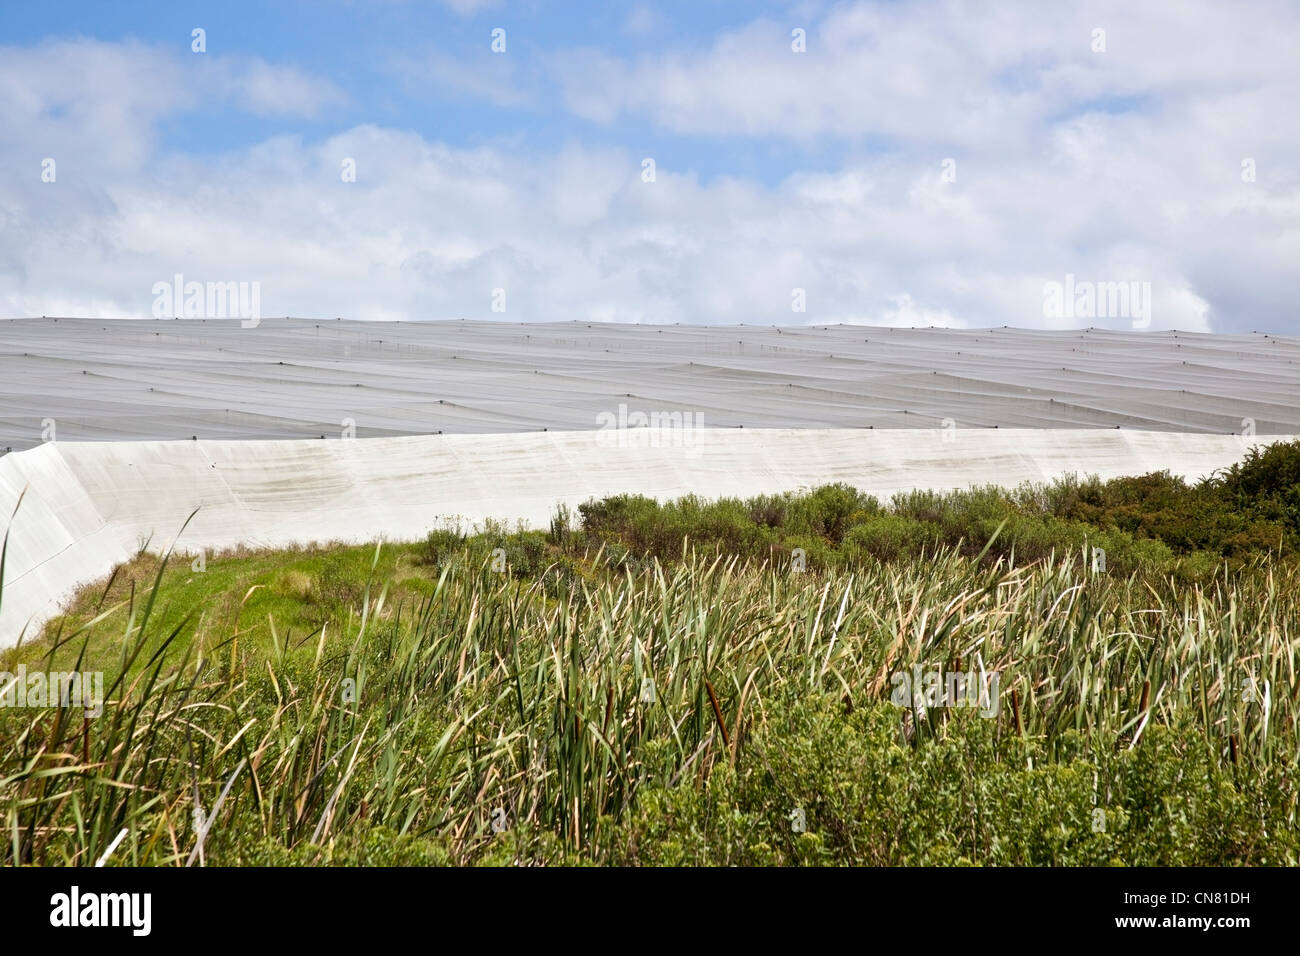 Agricultural protective sheeting on large scale, Eastern Cape, South Africa Stock Photo